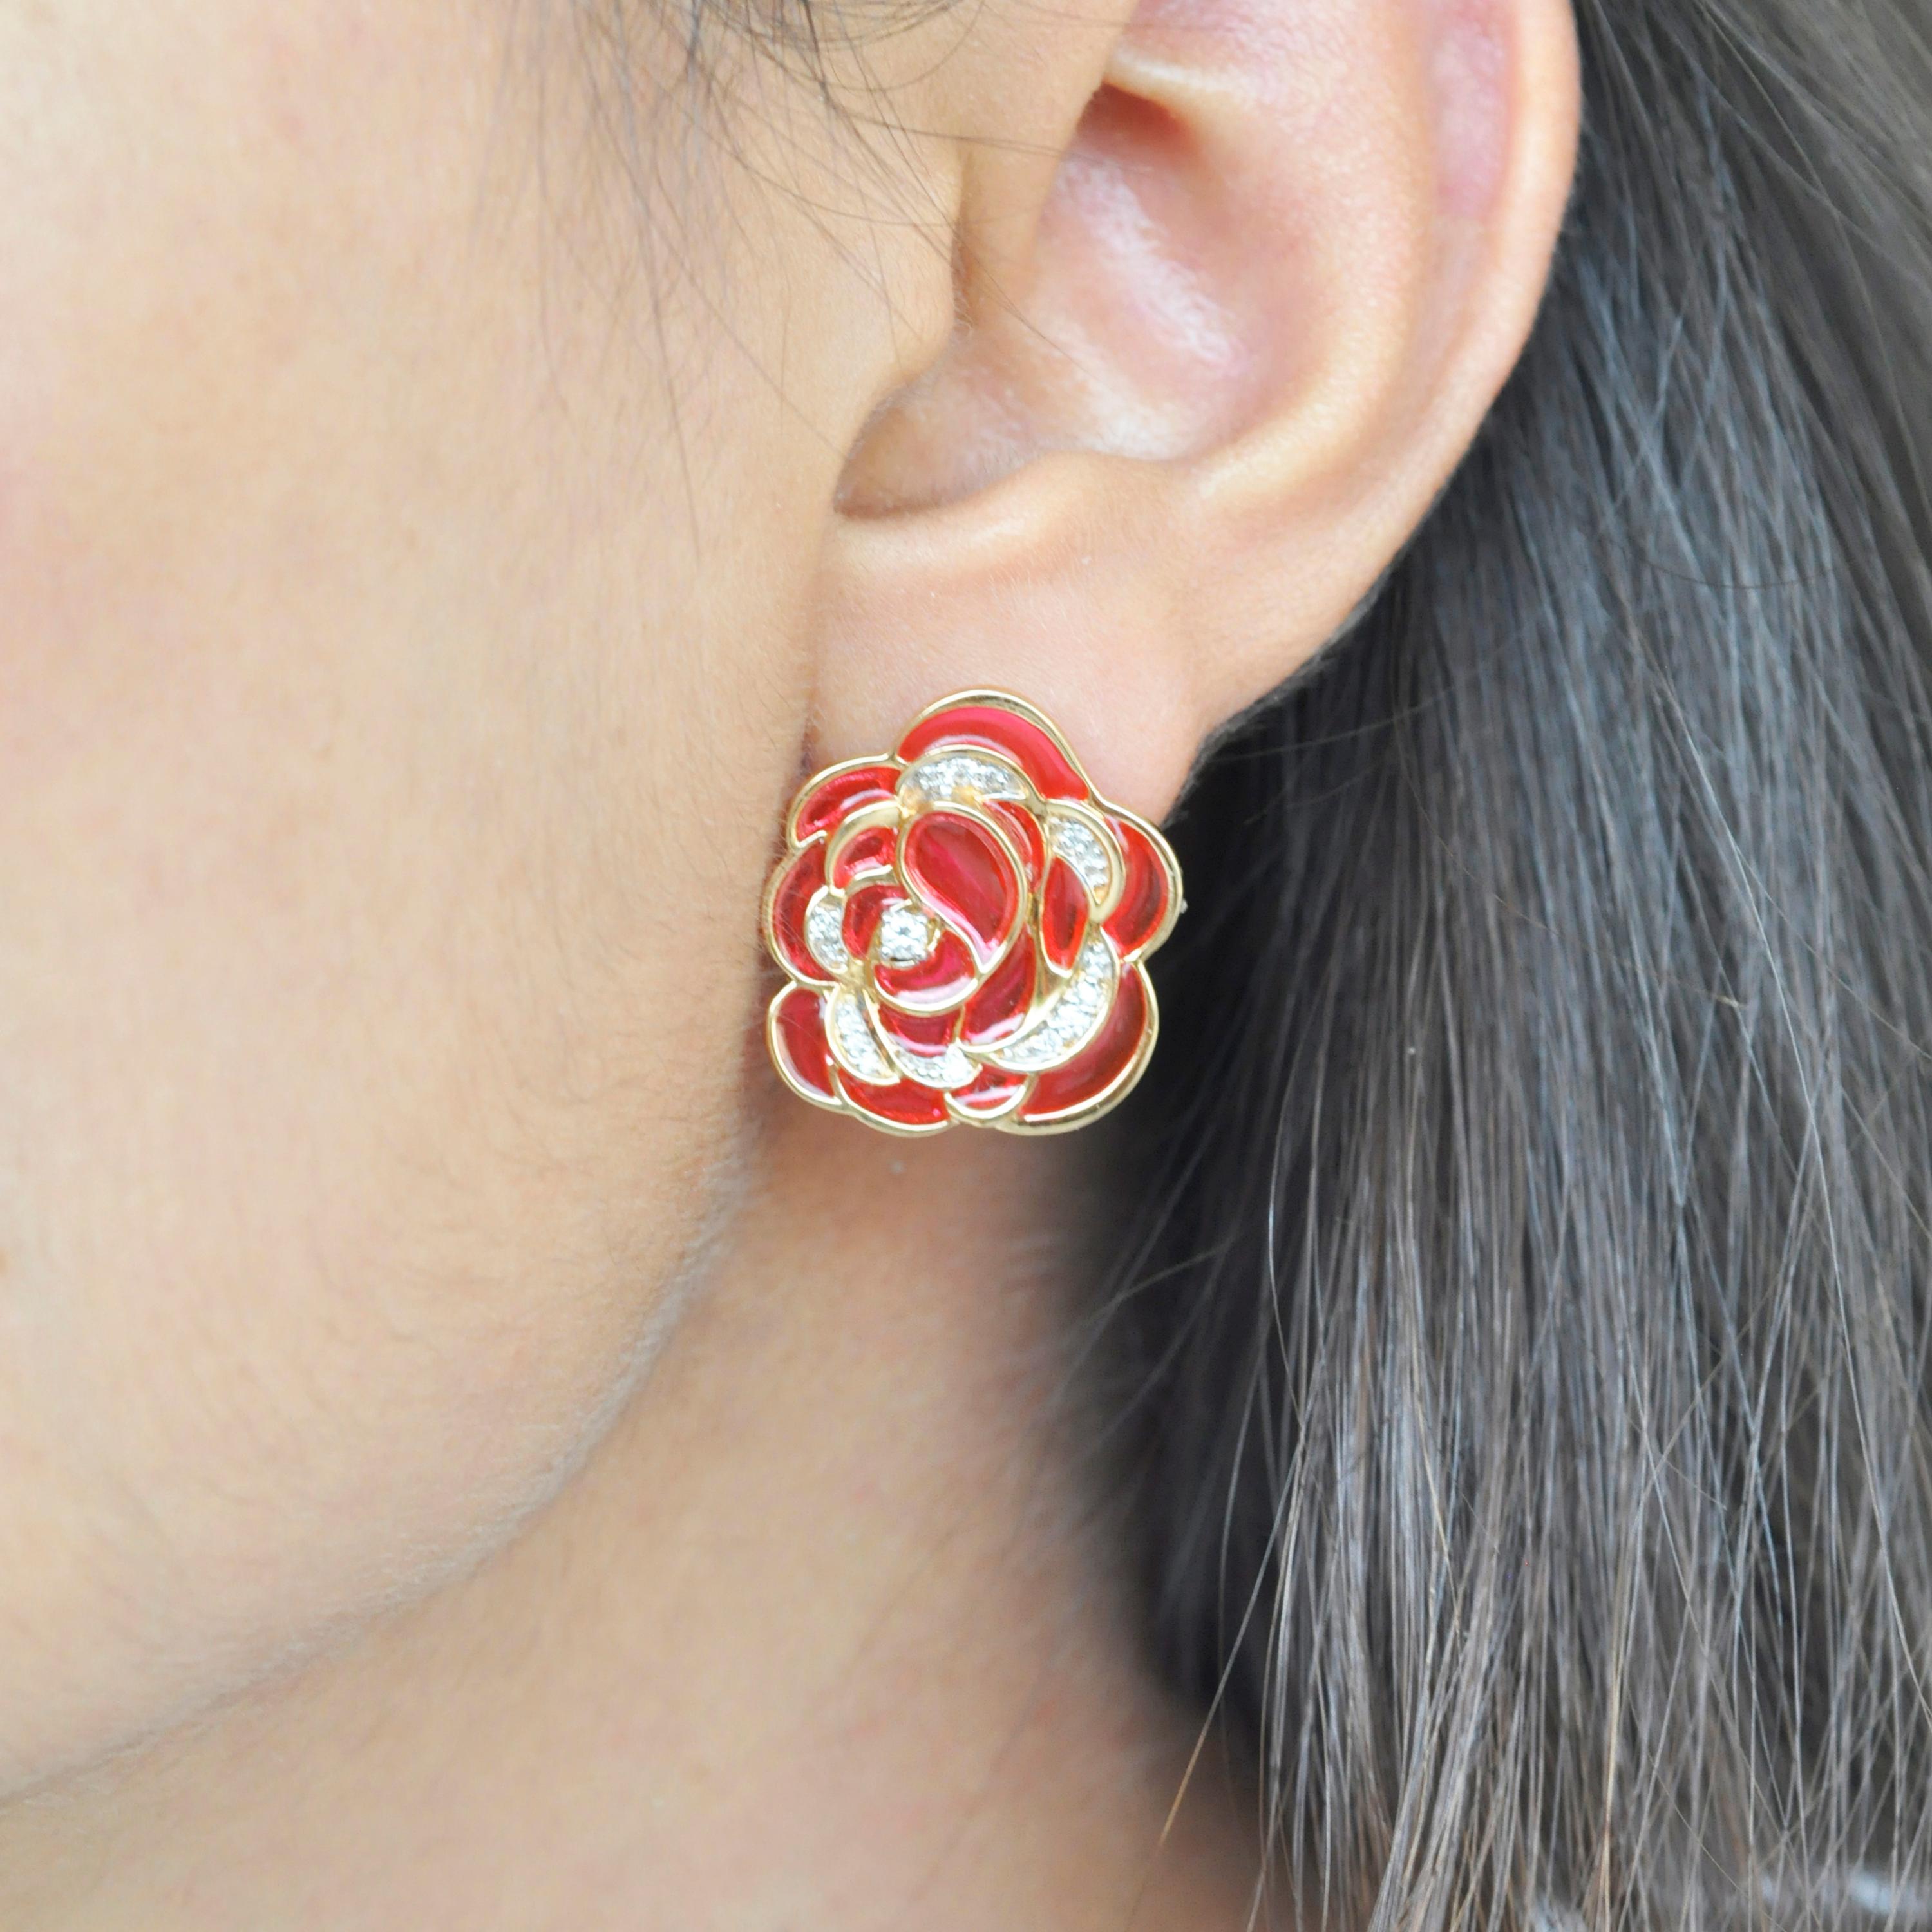 This 18k gold rose pink enamel plique-a-jour earring studs is inspired by the pink city of India - Jaipur. This collection evokes the romantic charm of Jaipur that captivates every heart. With no backing of the 18k Gold, it creates the effect of a